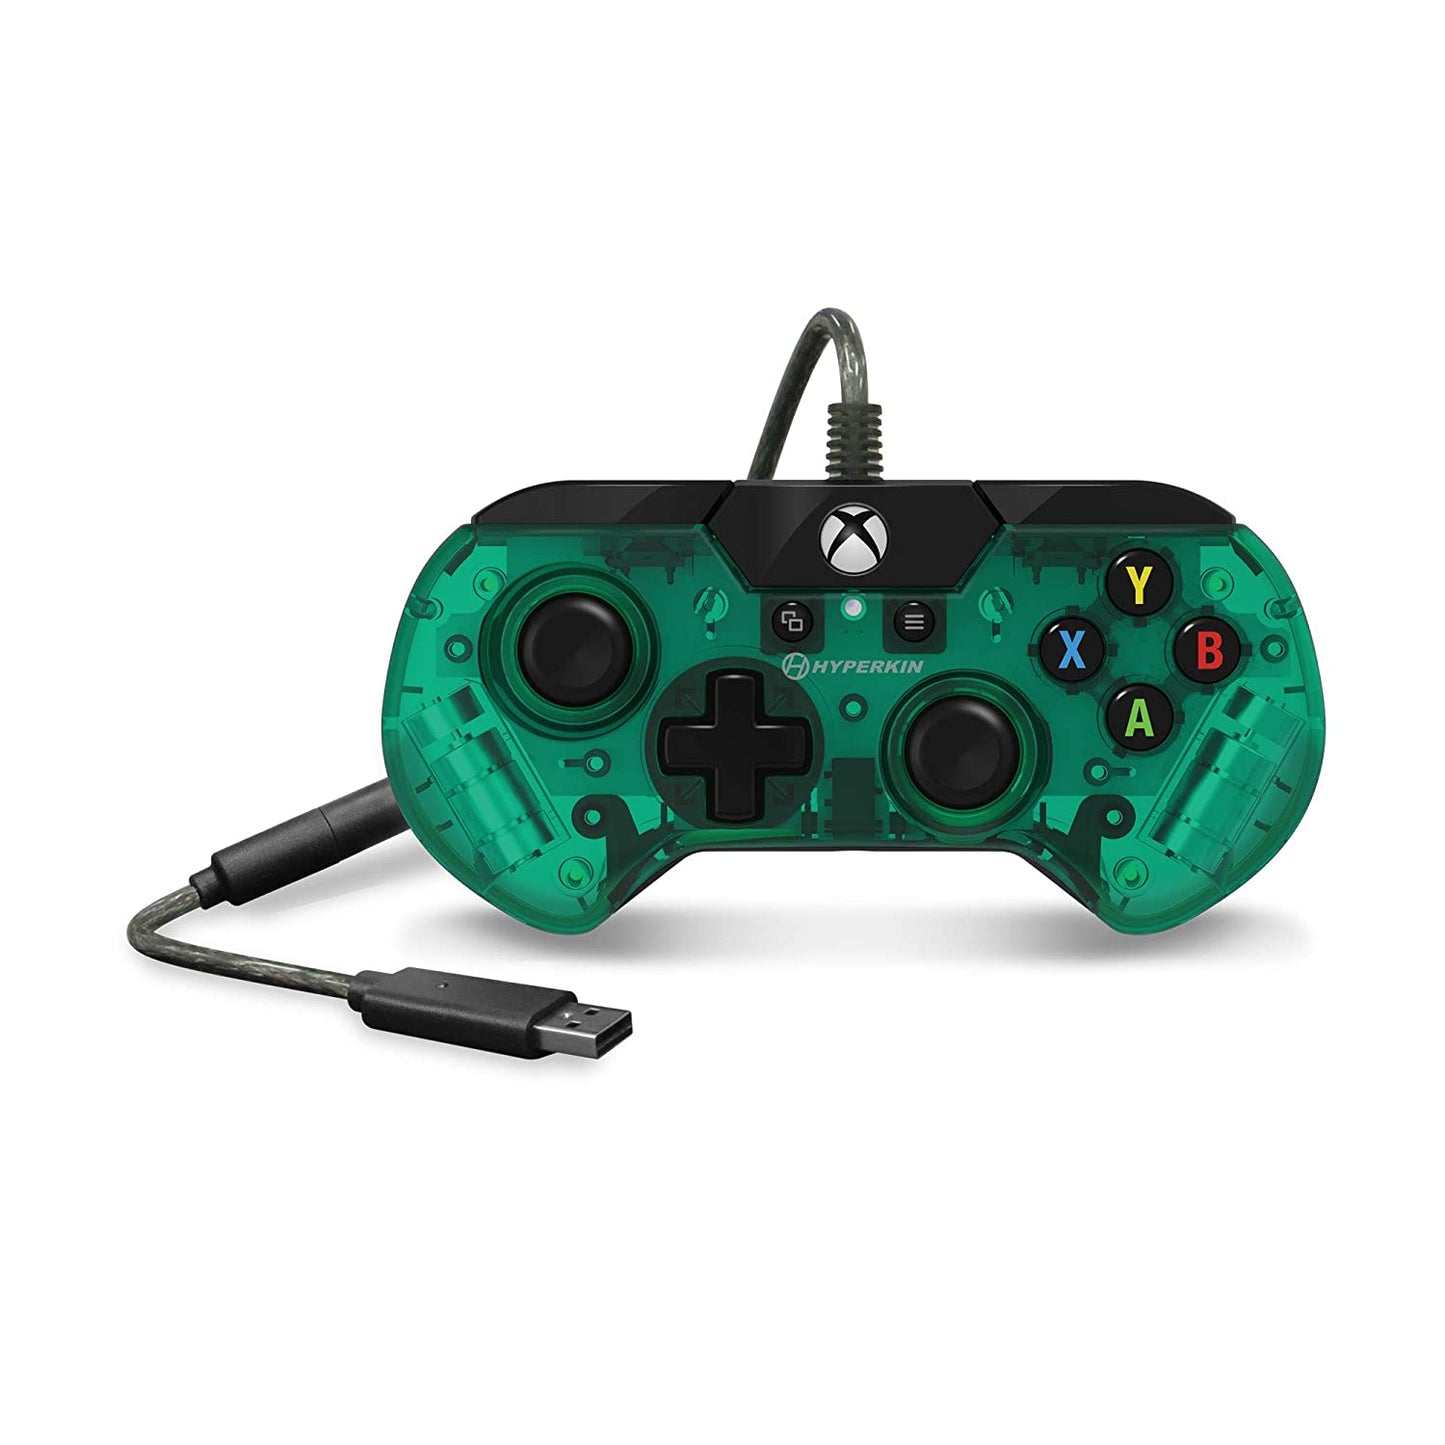 X91 Ice Wired Controller for Xbox One/Windows 10 PC (Aqua Green) - Hyperkin - Officially Licensed by Xbox